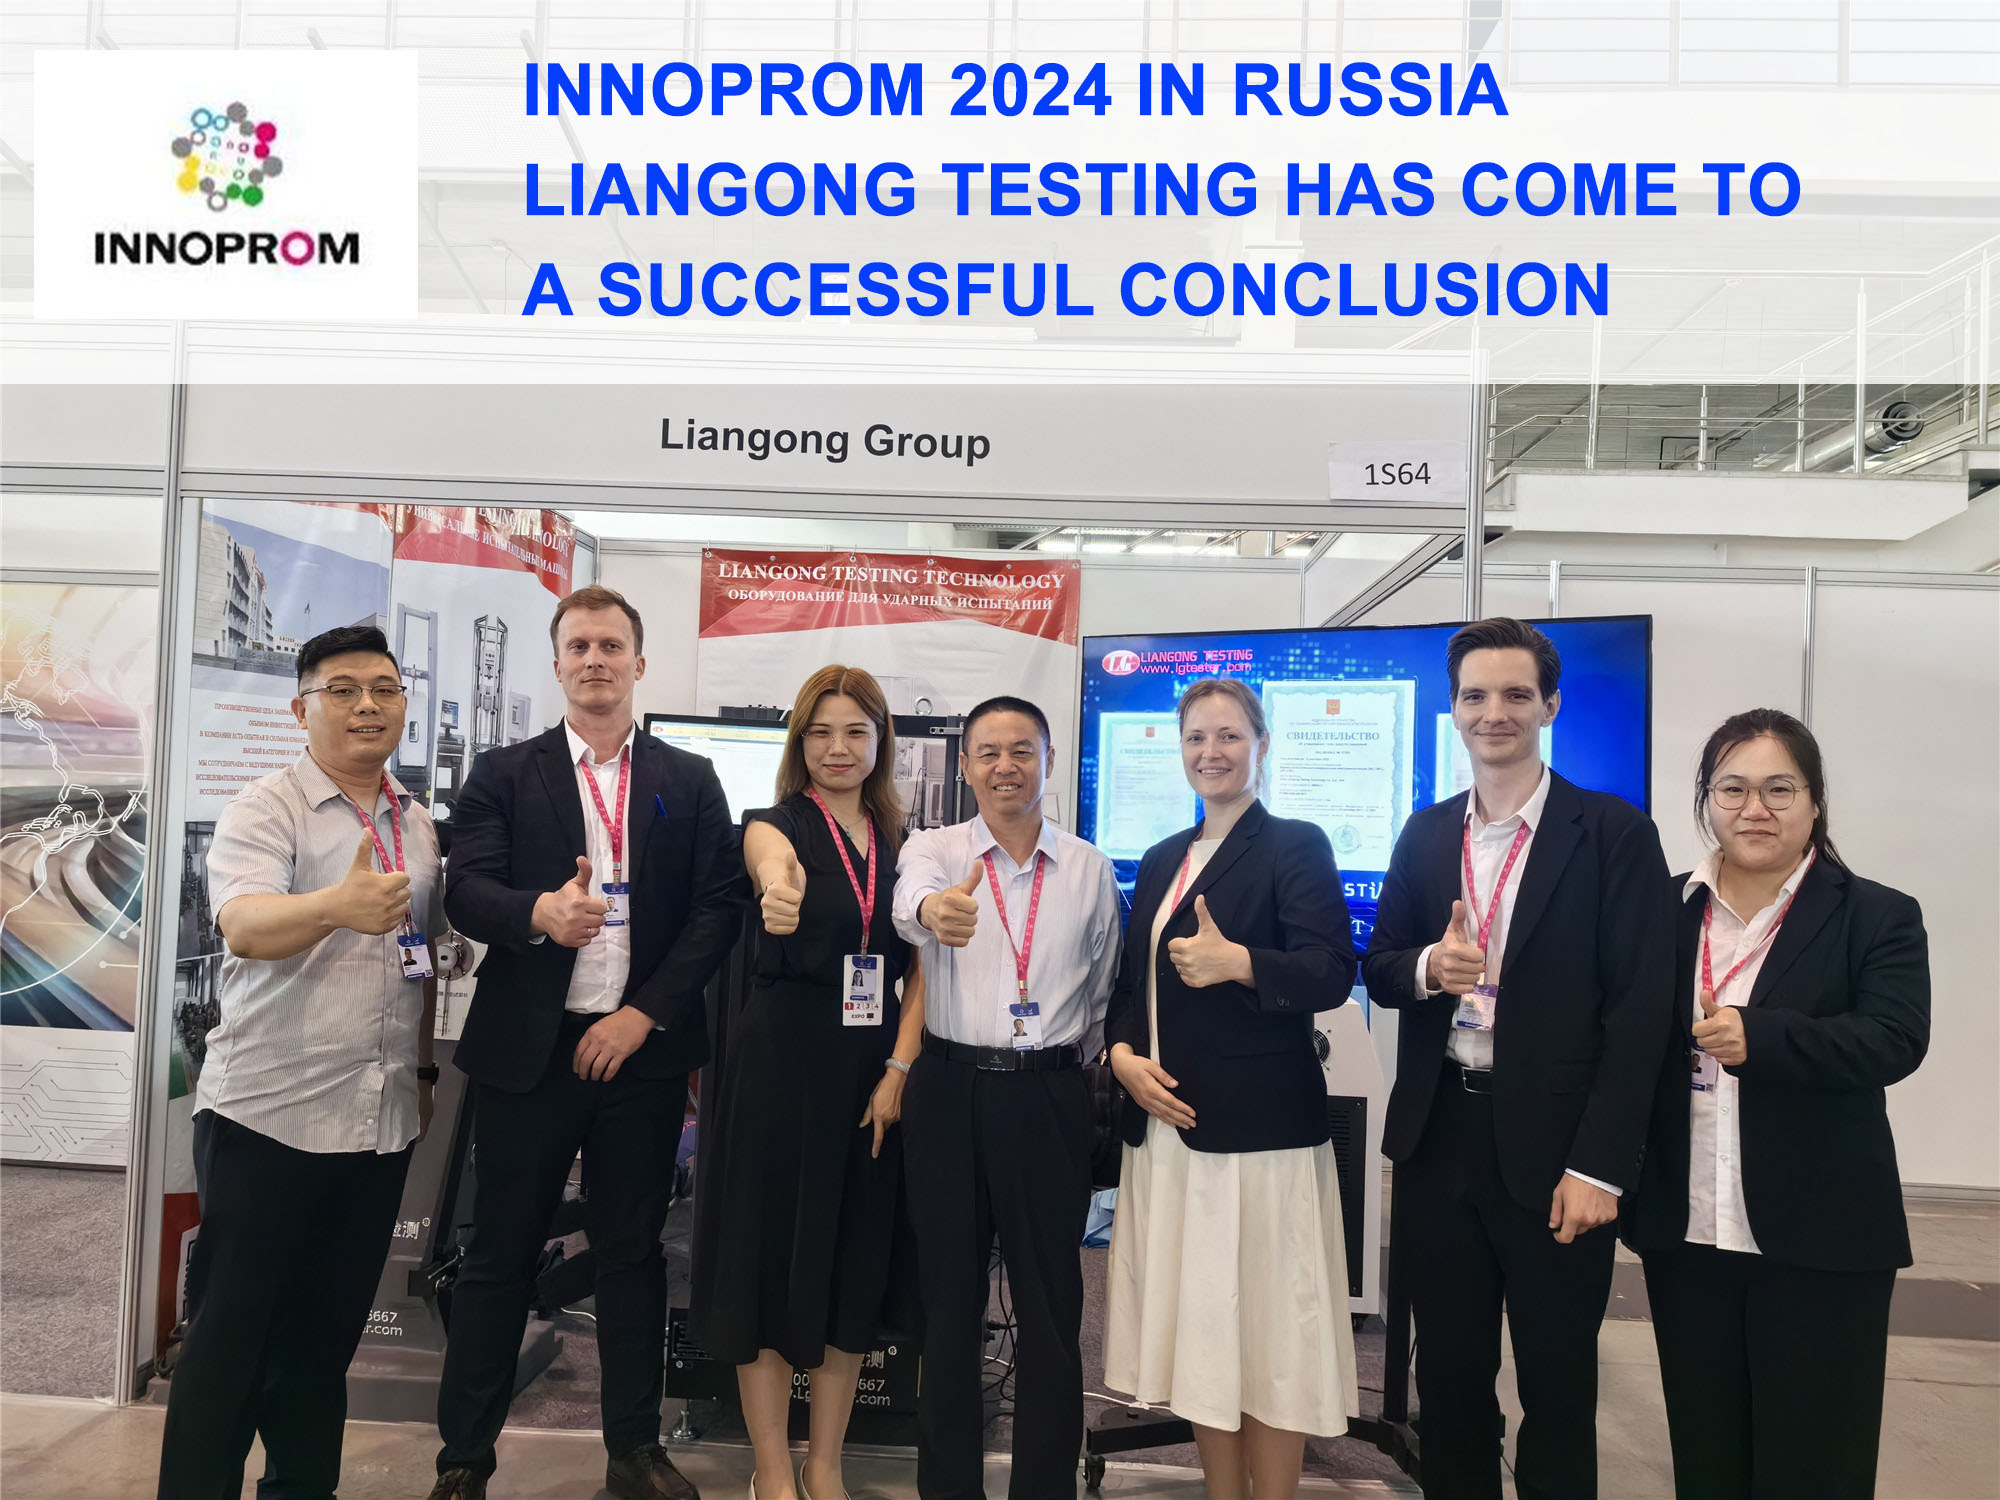 The INNOPROM 2024 in Russia has Come to A Successful Conclusion, Liangong Testing has Regained Its Brand Strength